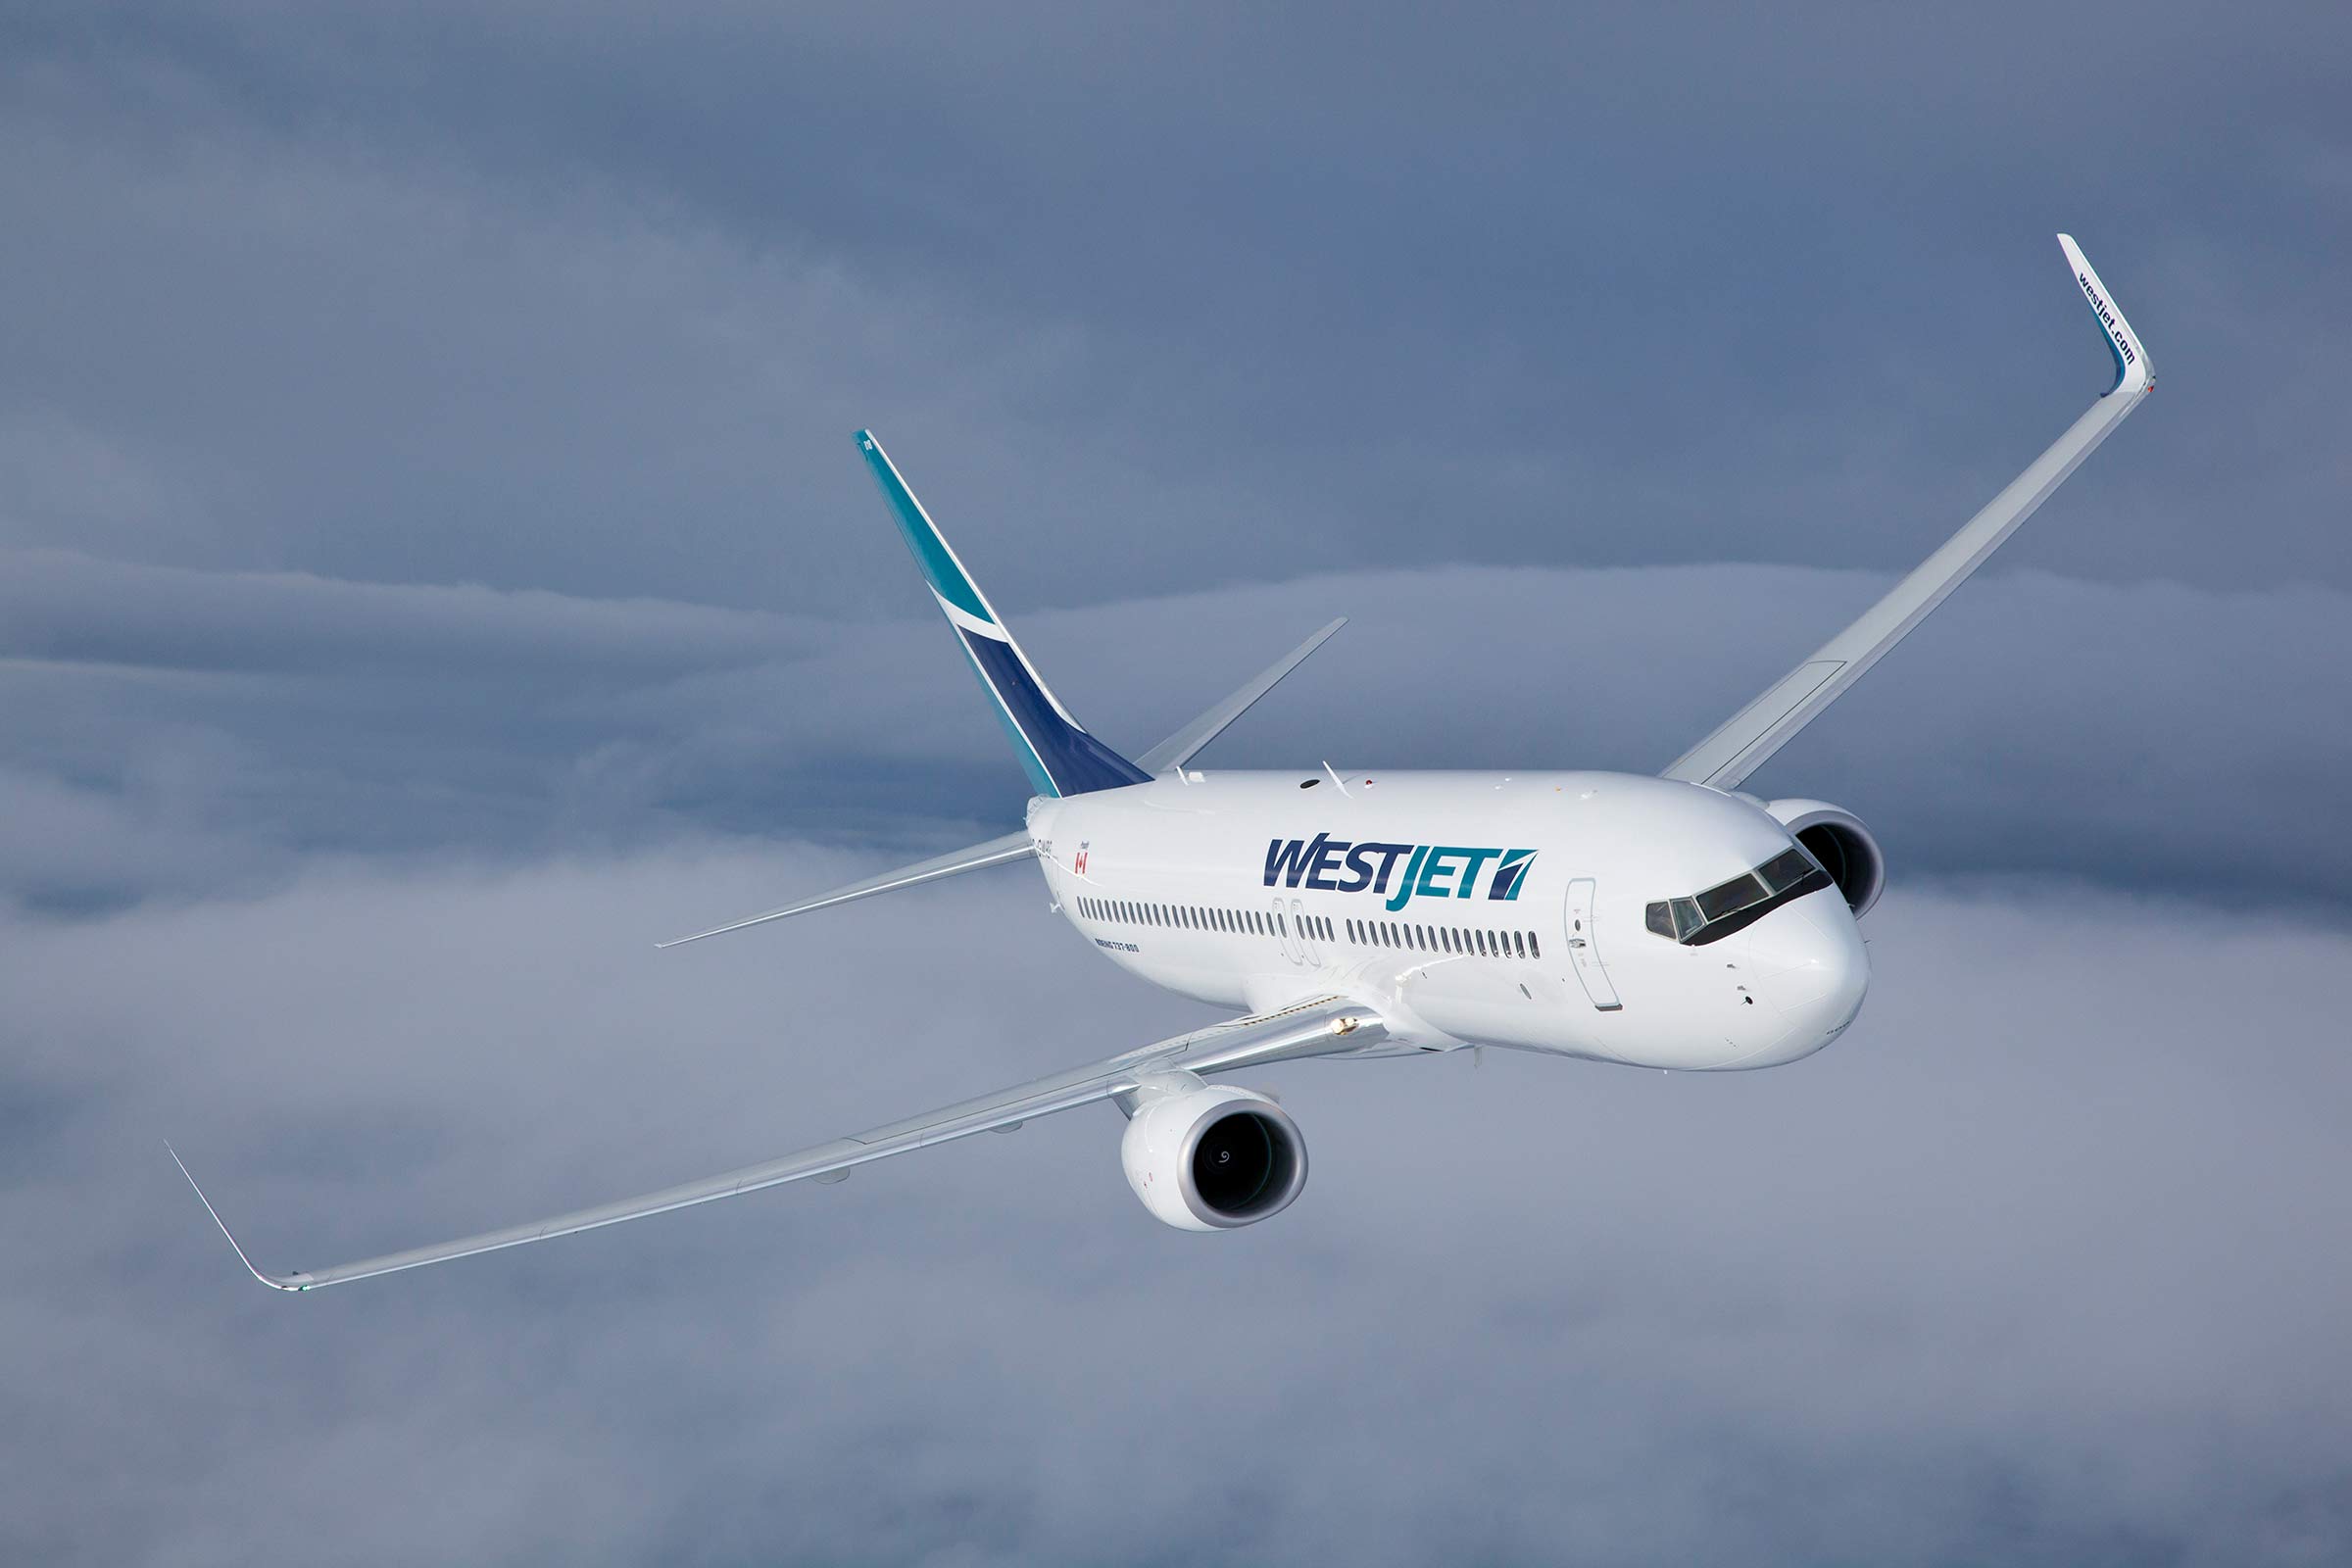 WestJet first airline in Canada to fly Aero Design Lab’s drag reduction modification kit